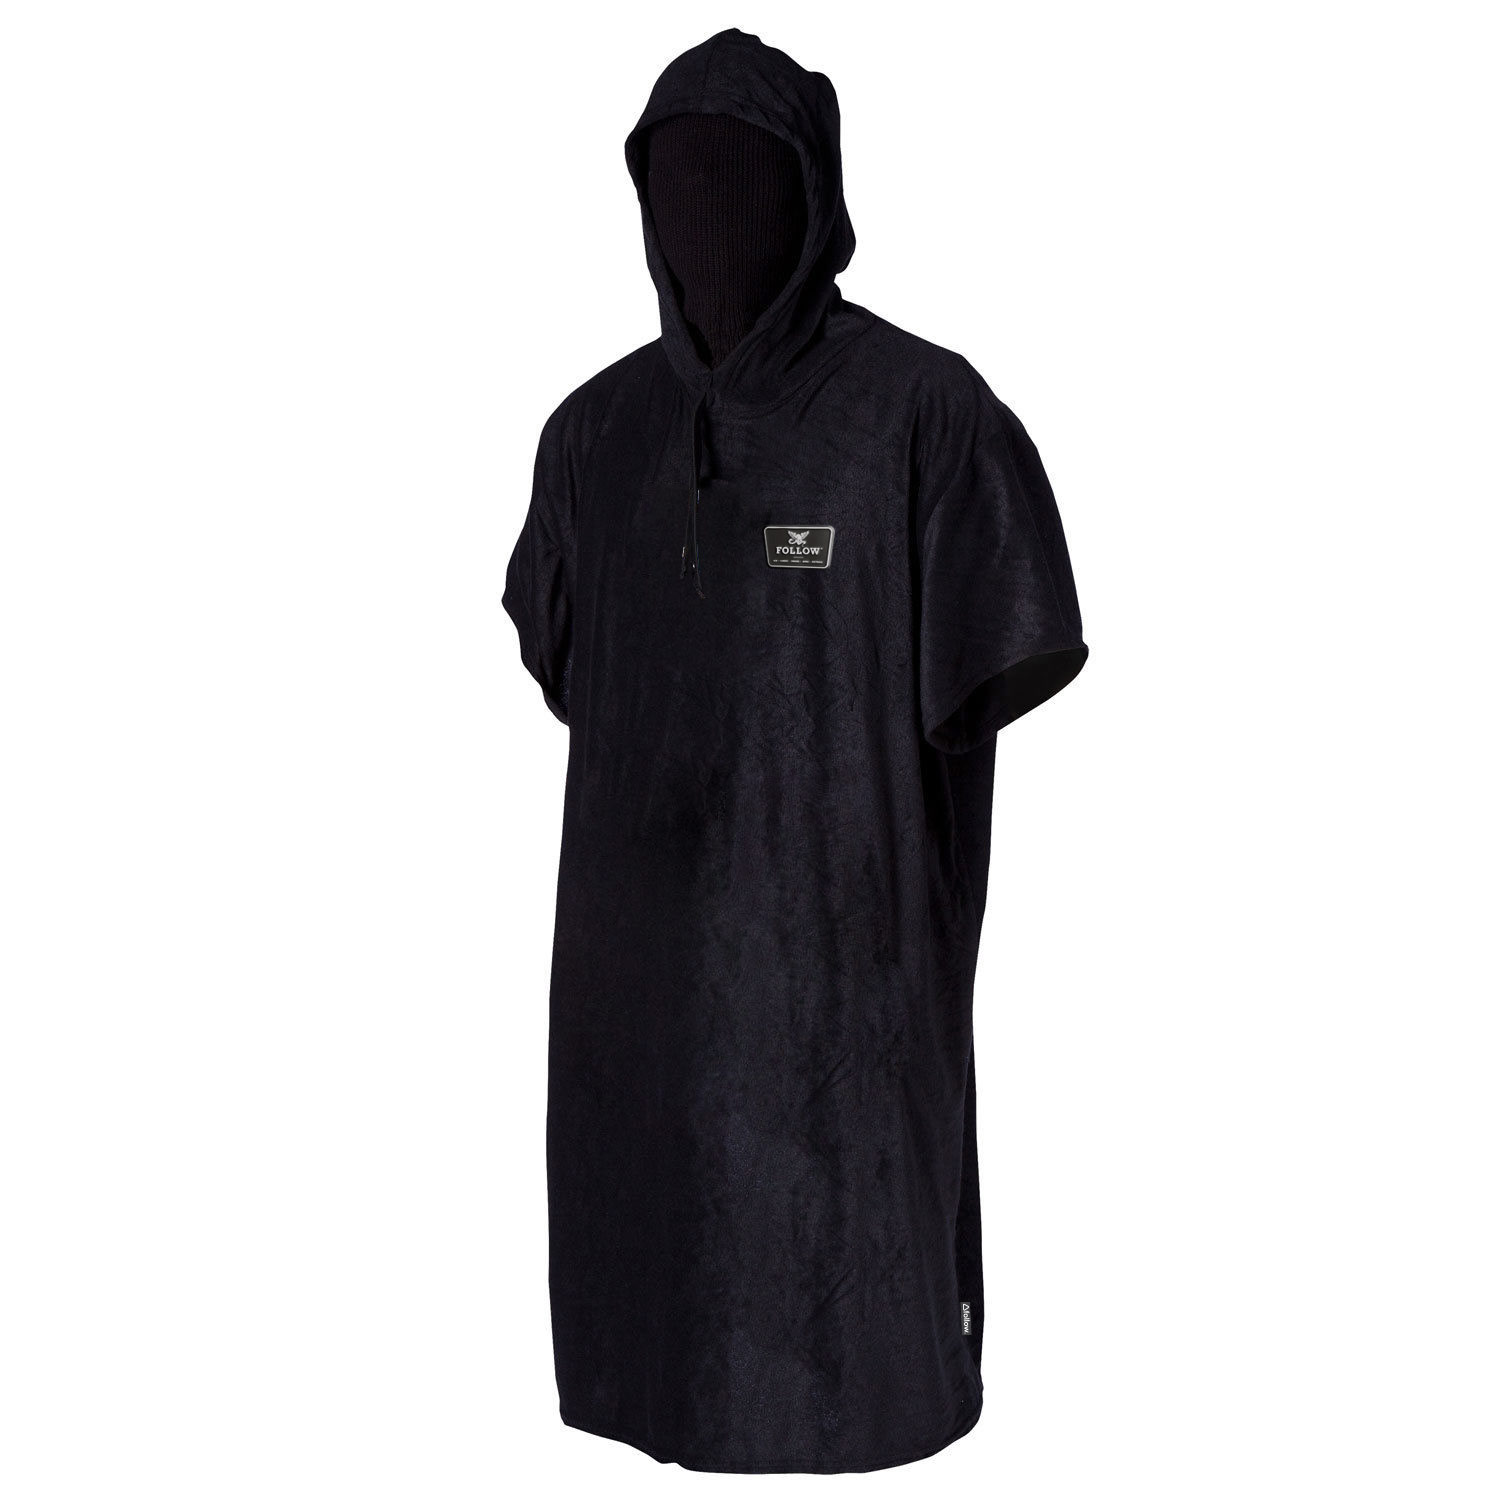   HOODED TOWELIE PONCHO - BLACK FOLLOW 2019